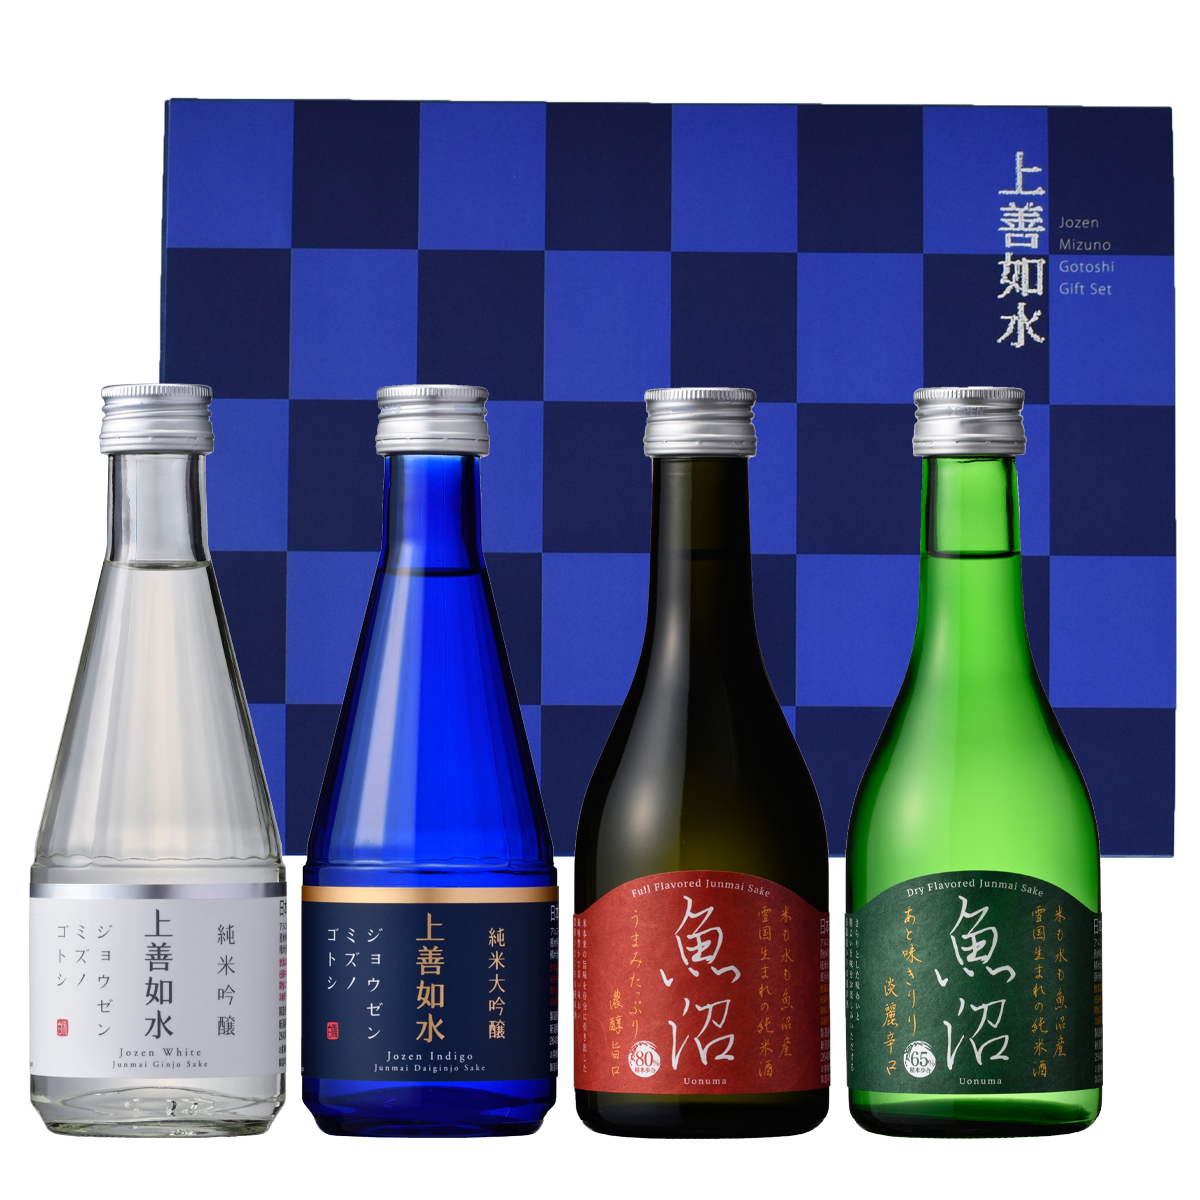 <span  ><span style='font-weight:bold;color:#666;'>上善如水×魚沼 飲み比べセット 300ml×4本入り</span></span><br>3,500円<span style='font-size:10px' >(税込)</span>